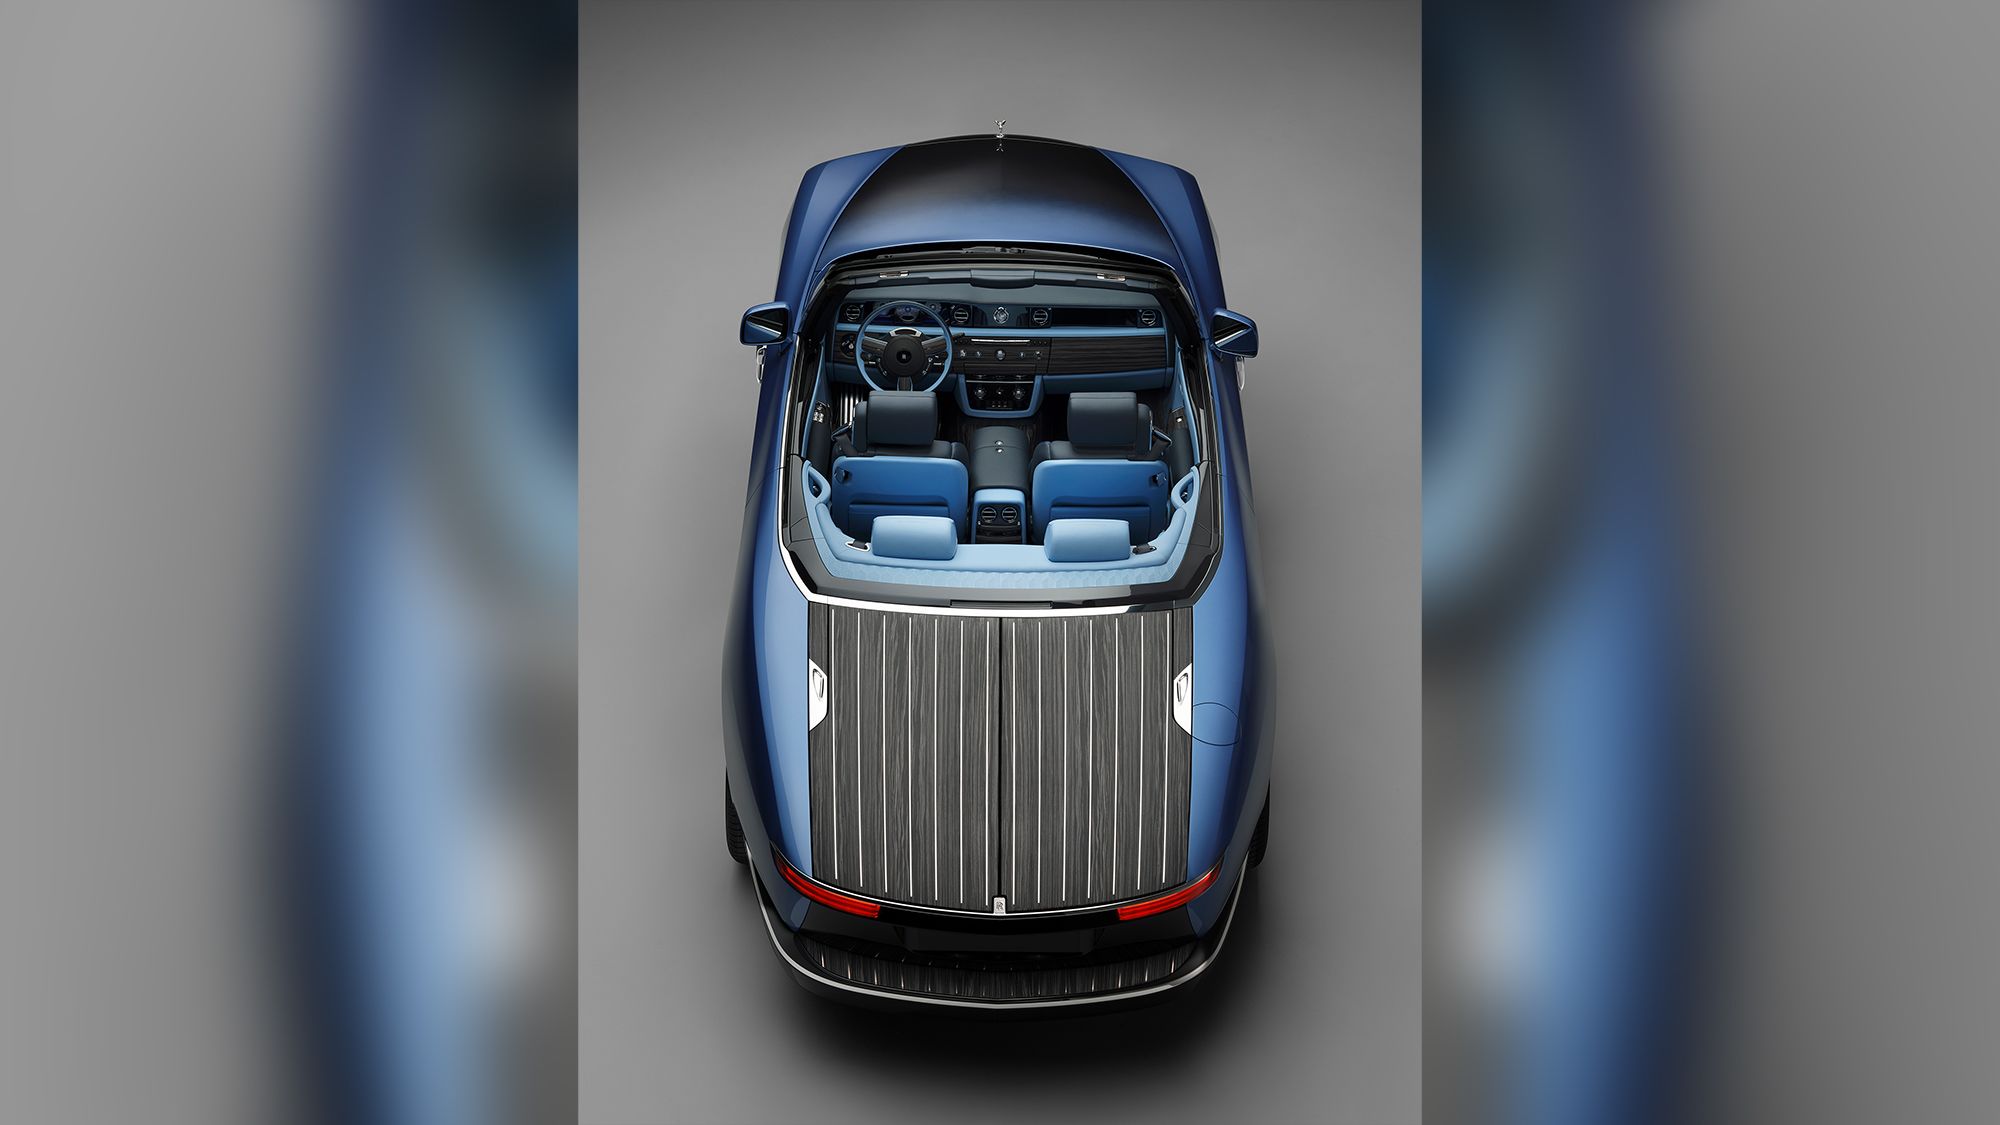 Rolls-Royce drives up car luxury with 'Boat Tail